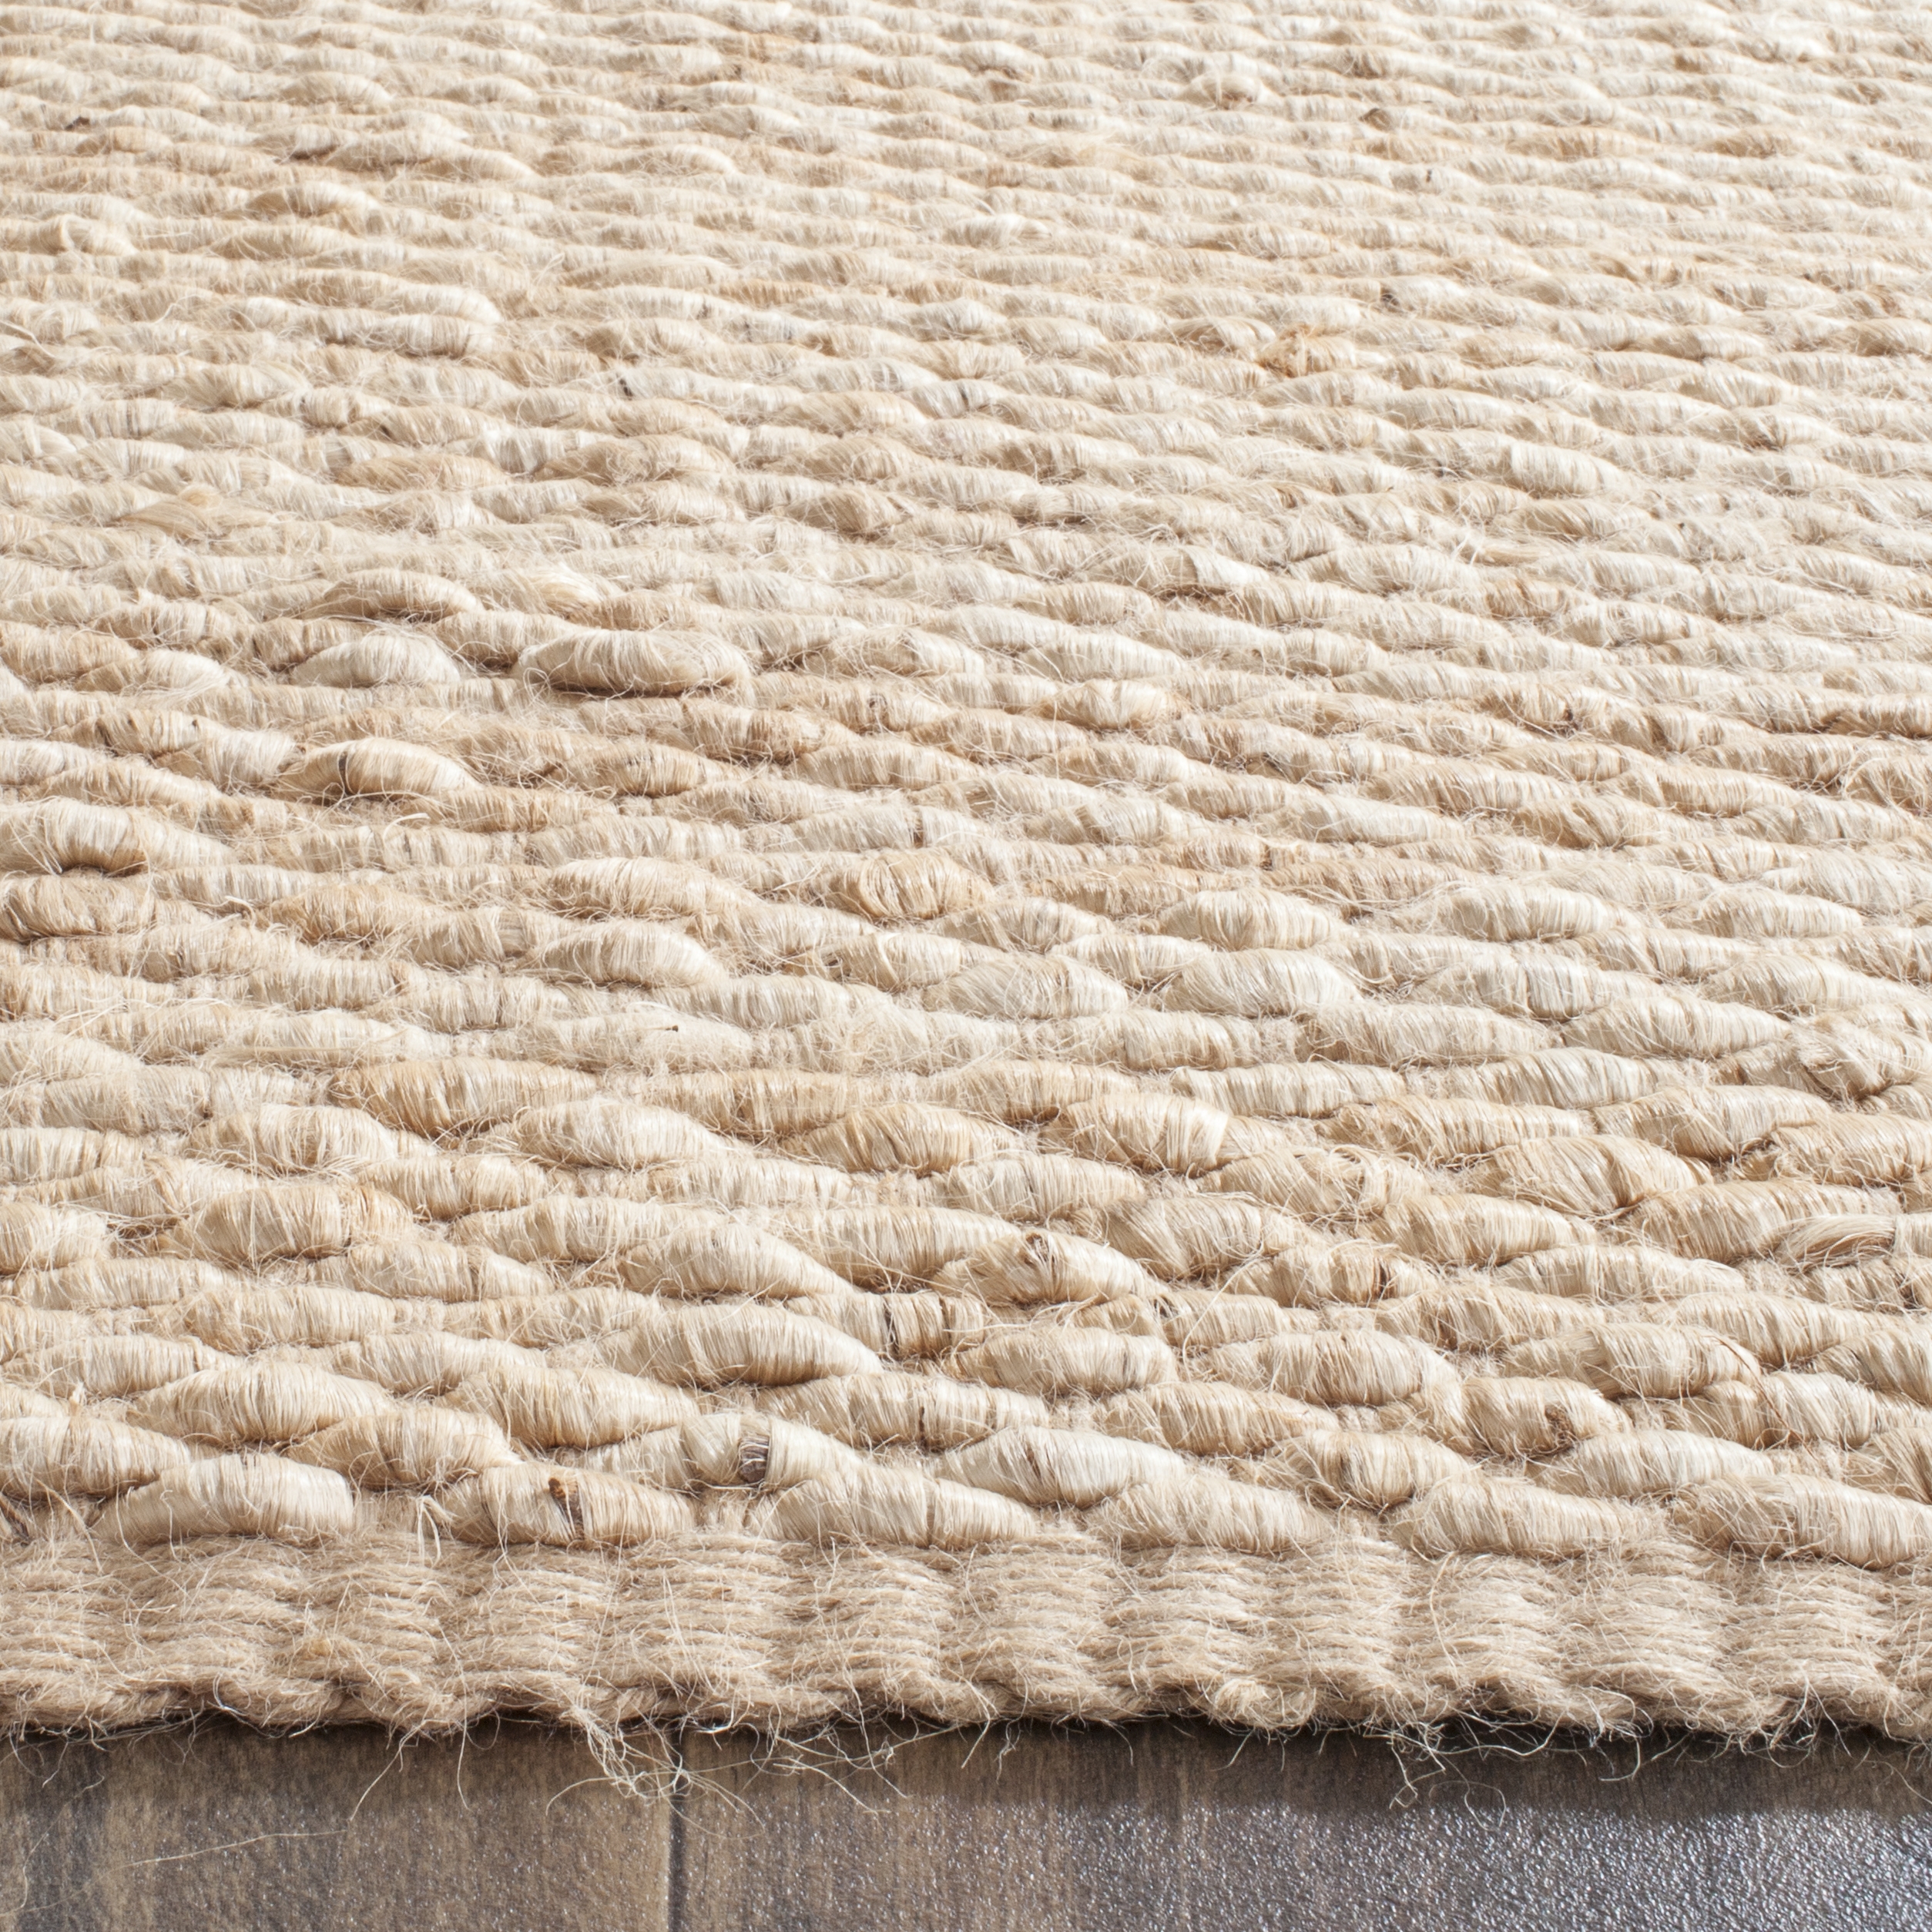 Arlo Home Hand Woven Area Rug, NF459A, Natural,  5' X 8' - Image 2